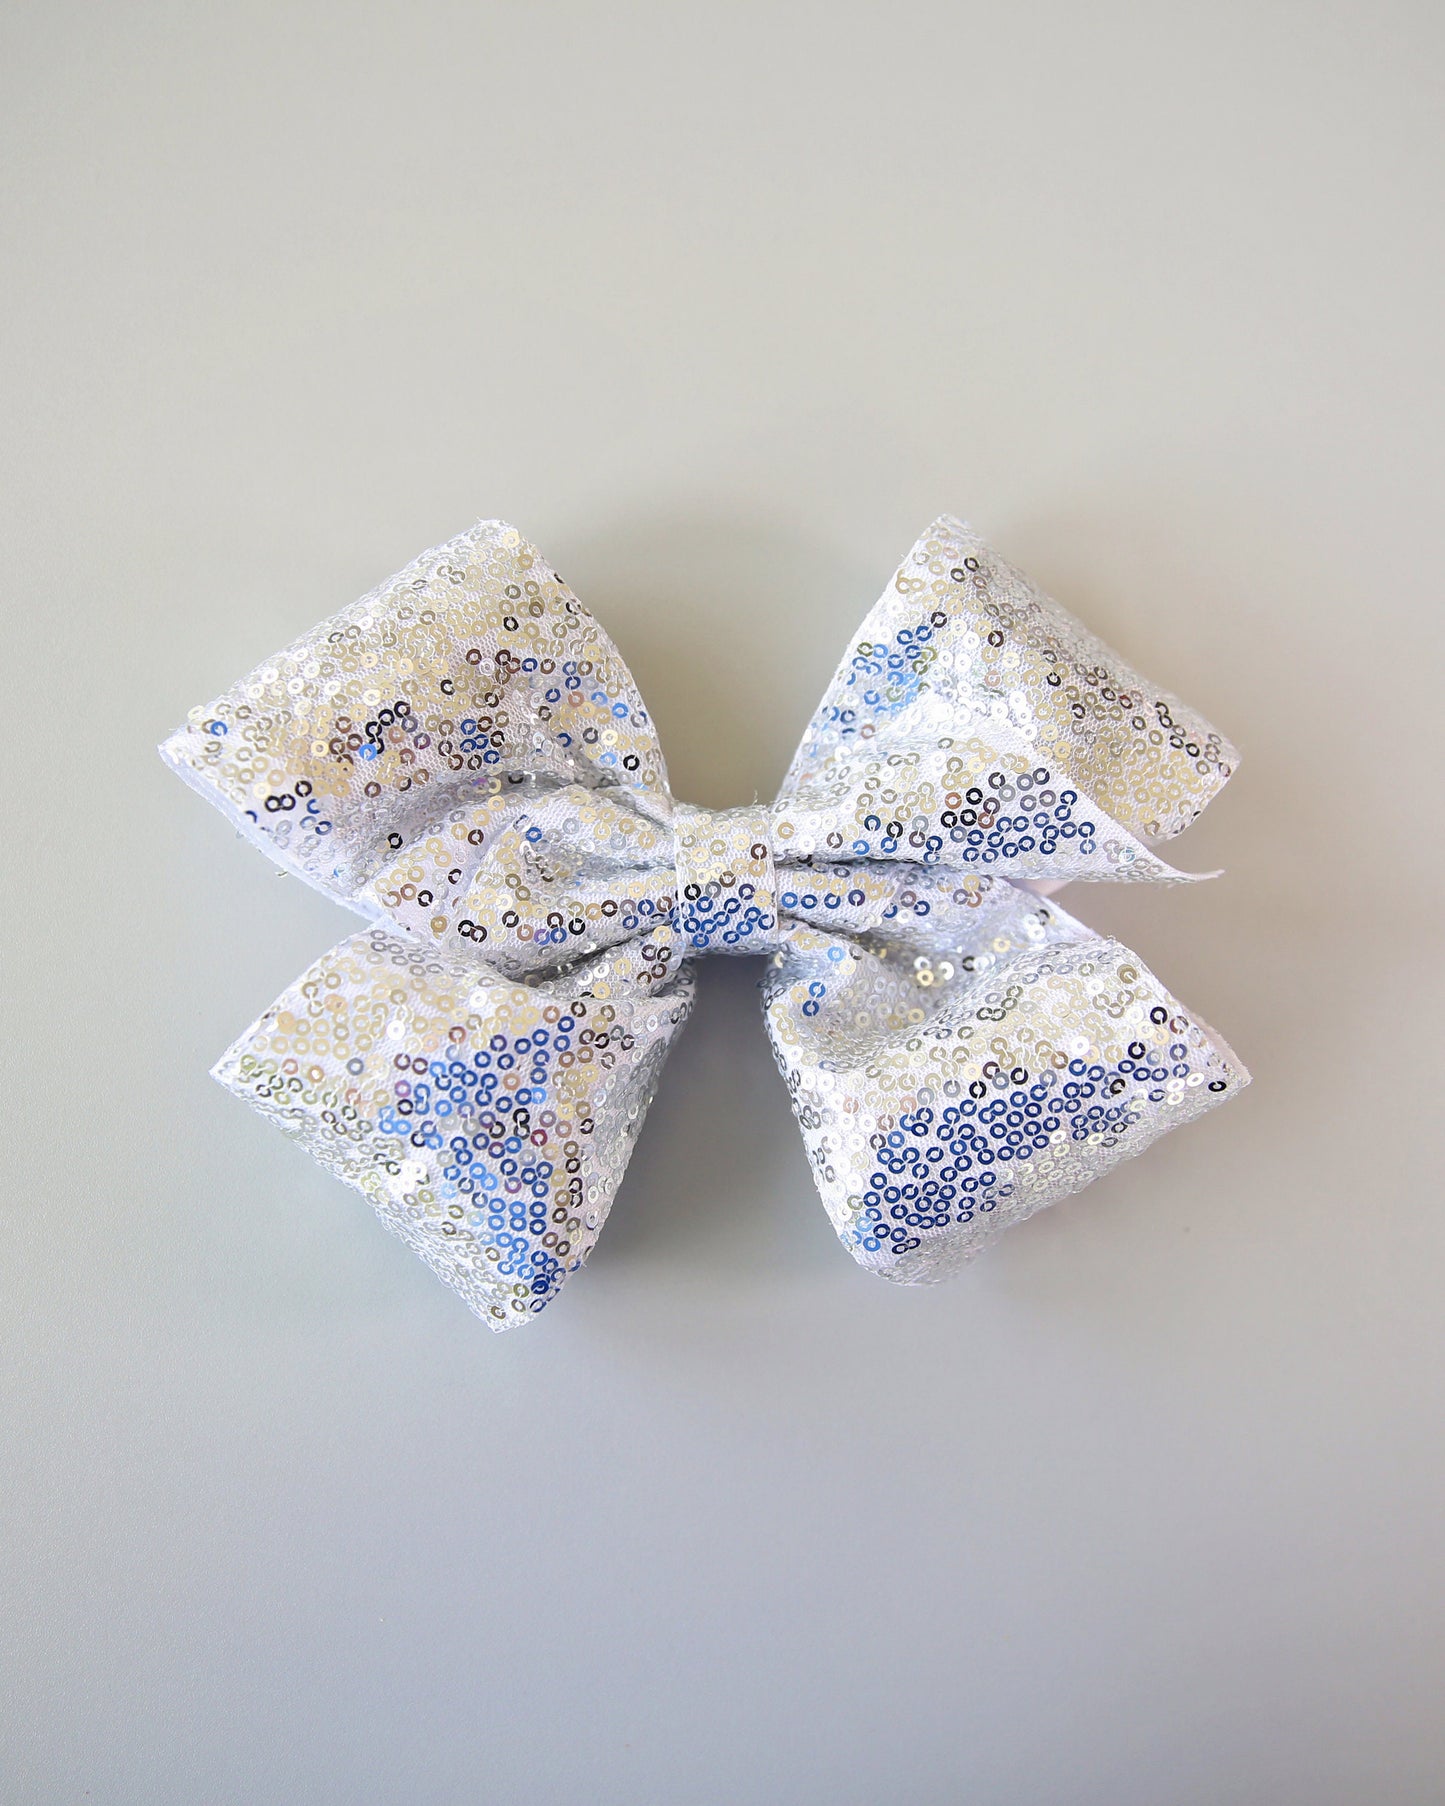 Large Sequin Silver Bow Clip- Large Sequin Bow Clip, Silver Bow, Silver Dance Bow- Oversized Sequin Cheer Bow, Girls Gift, Silver Sequin Bow